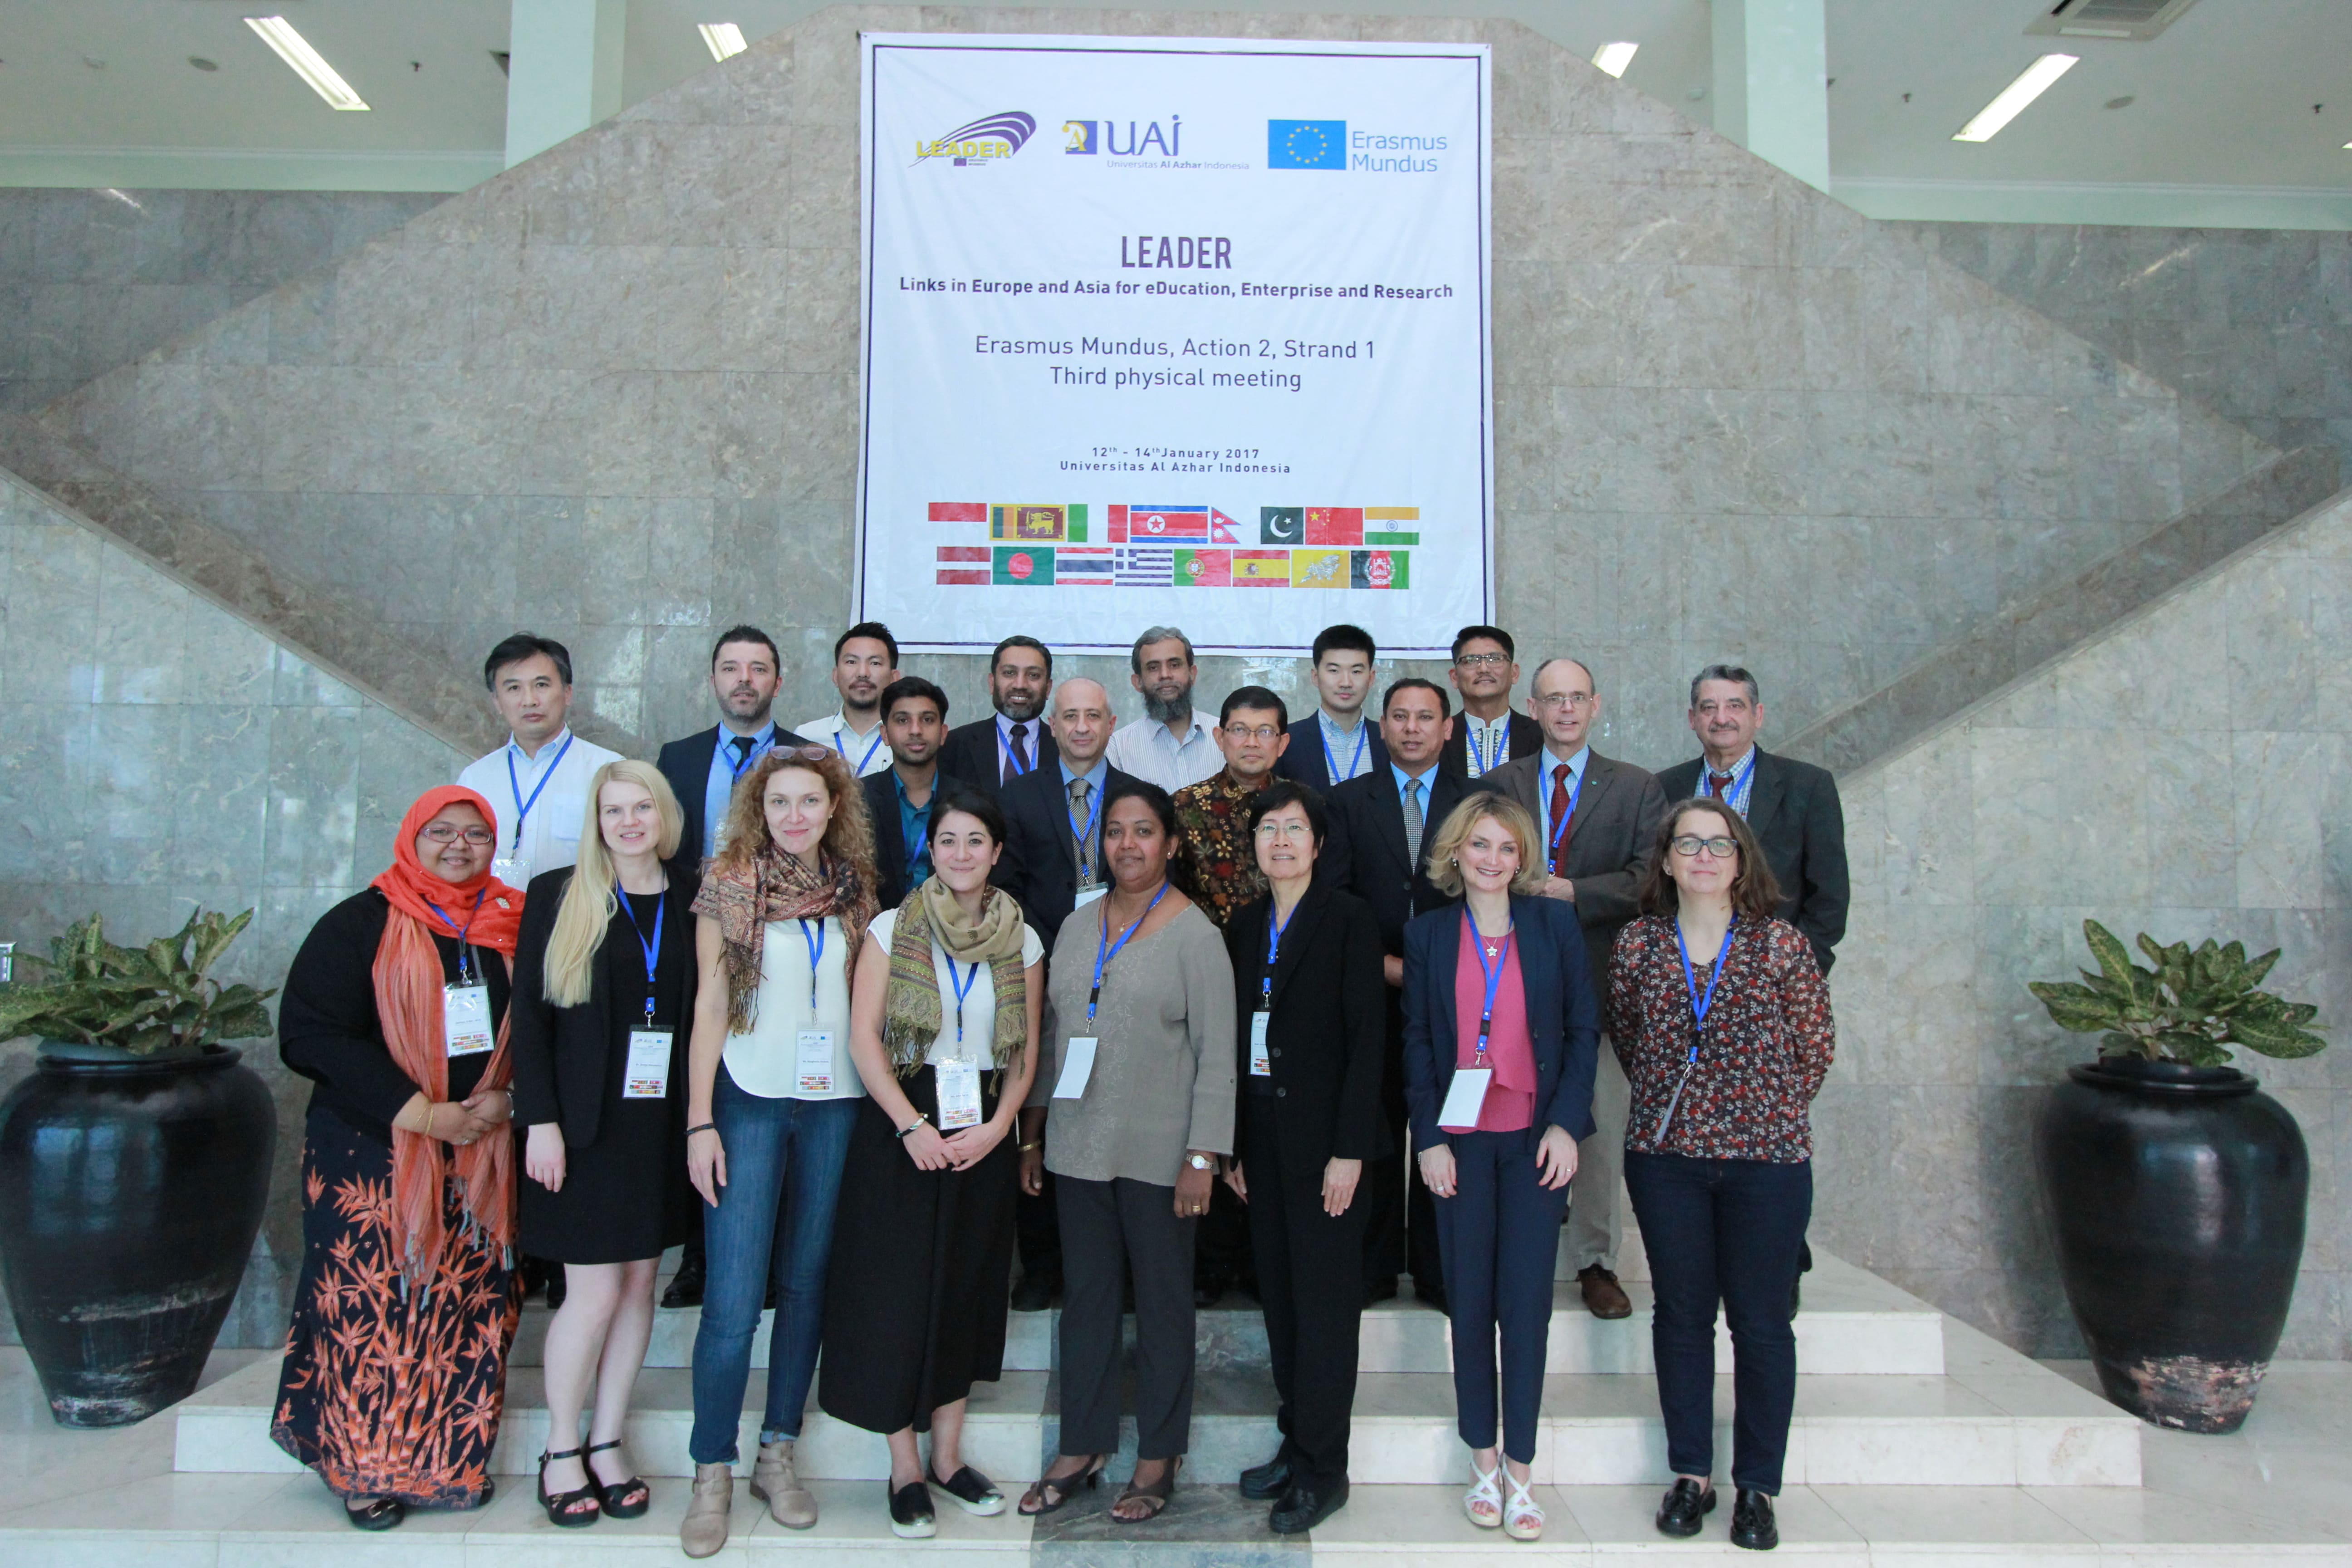 Third Physical Meeting Of Links In Europe And Asia For EDucation, Enterprise And Research (LEADER),  Erasmus Mundus, Action 2, Strand 1 At Universitas Al Azhar Indonesia